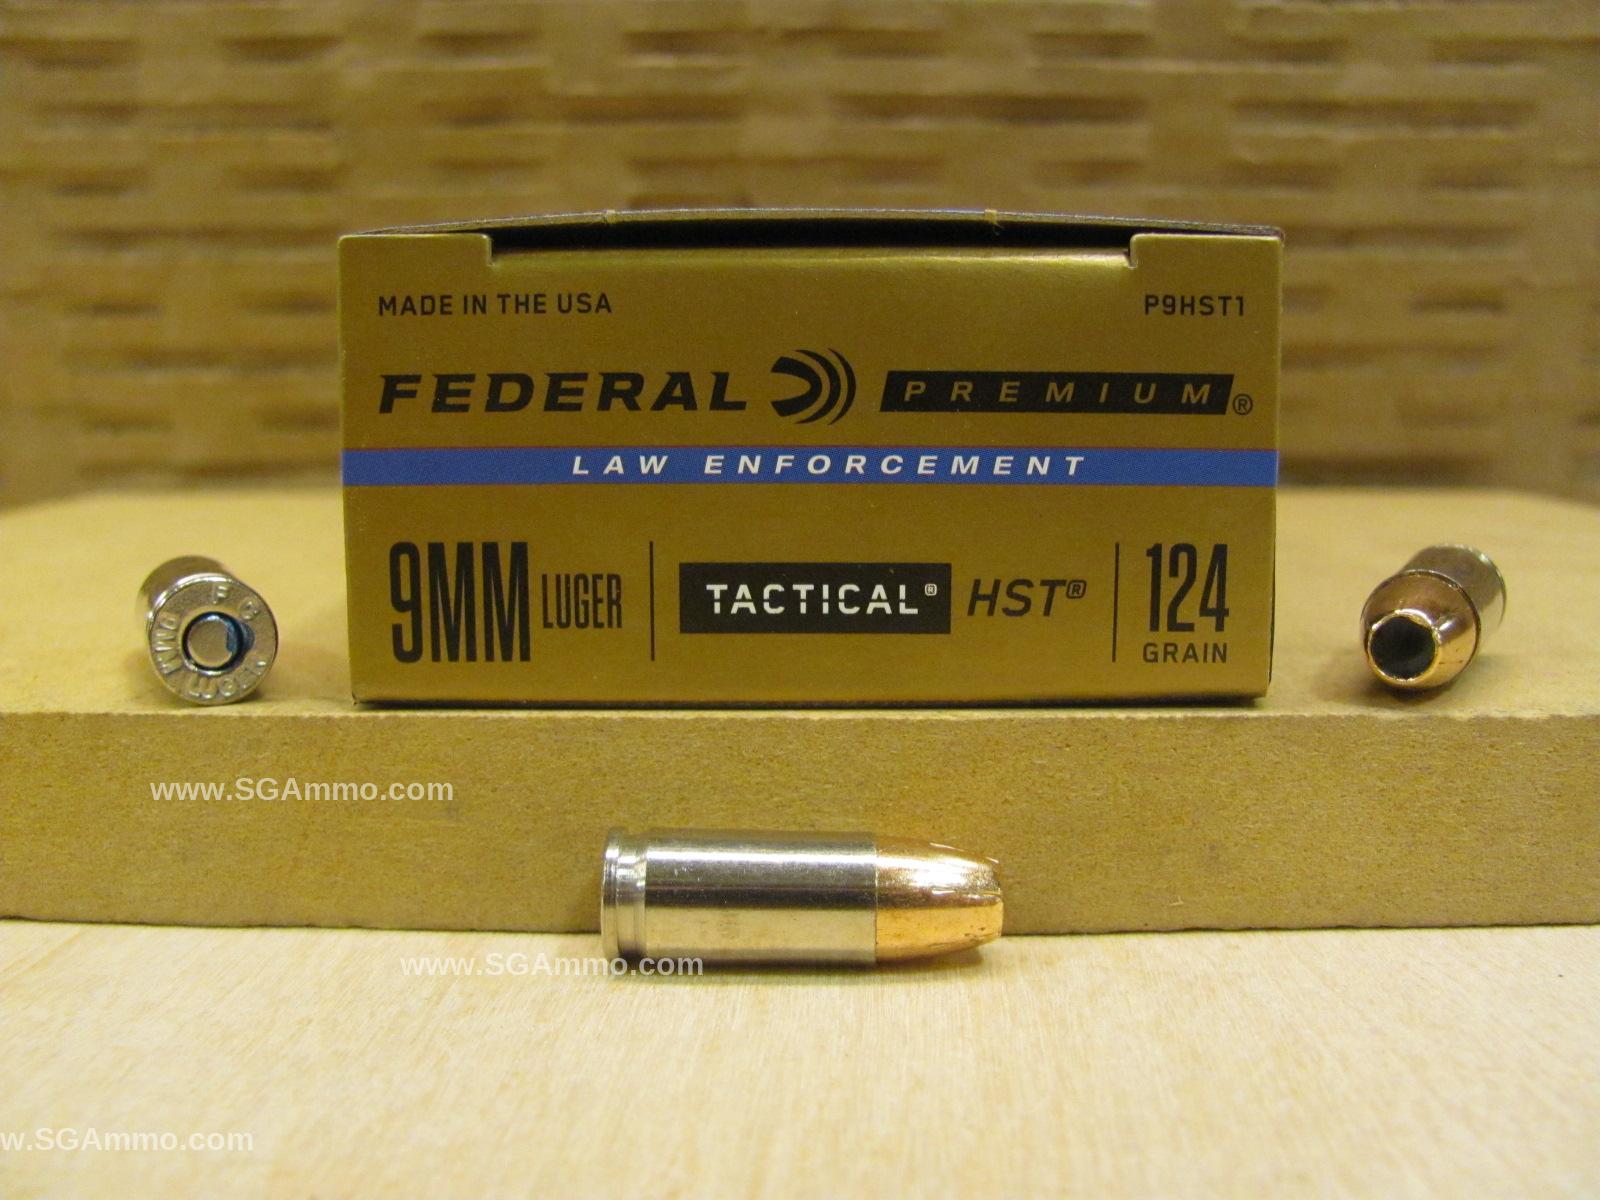 50 Round Box - 9mm Luger Federal HST 124 Grain Hollow Point LE Ammo - P9HST1